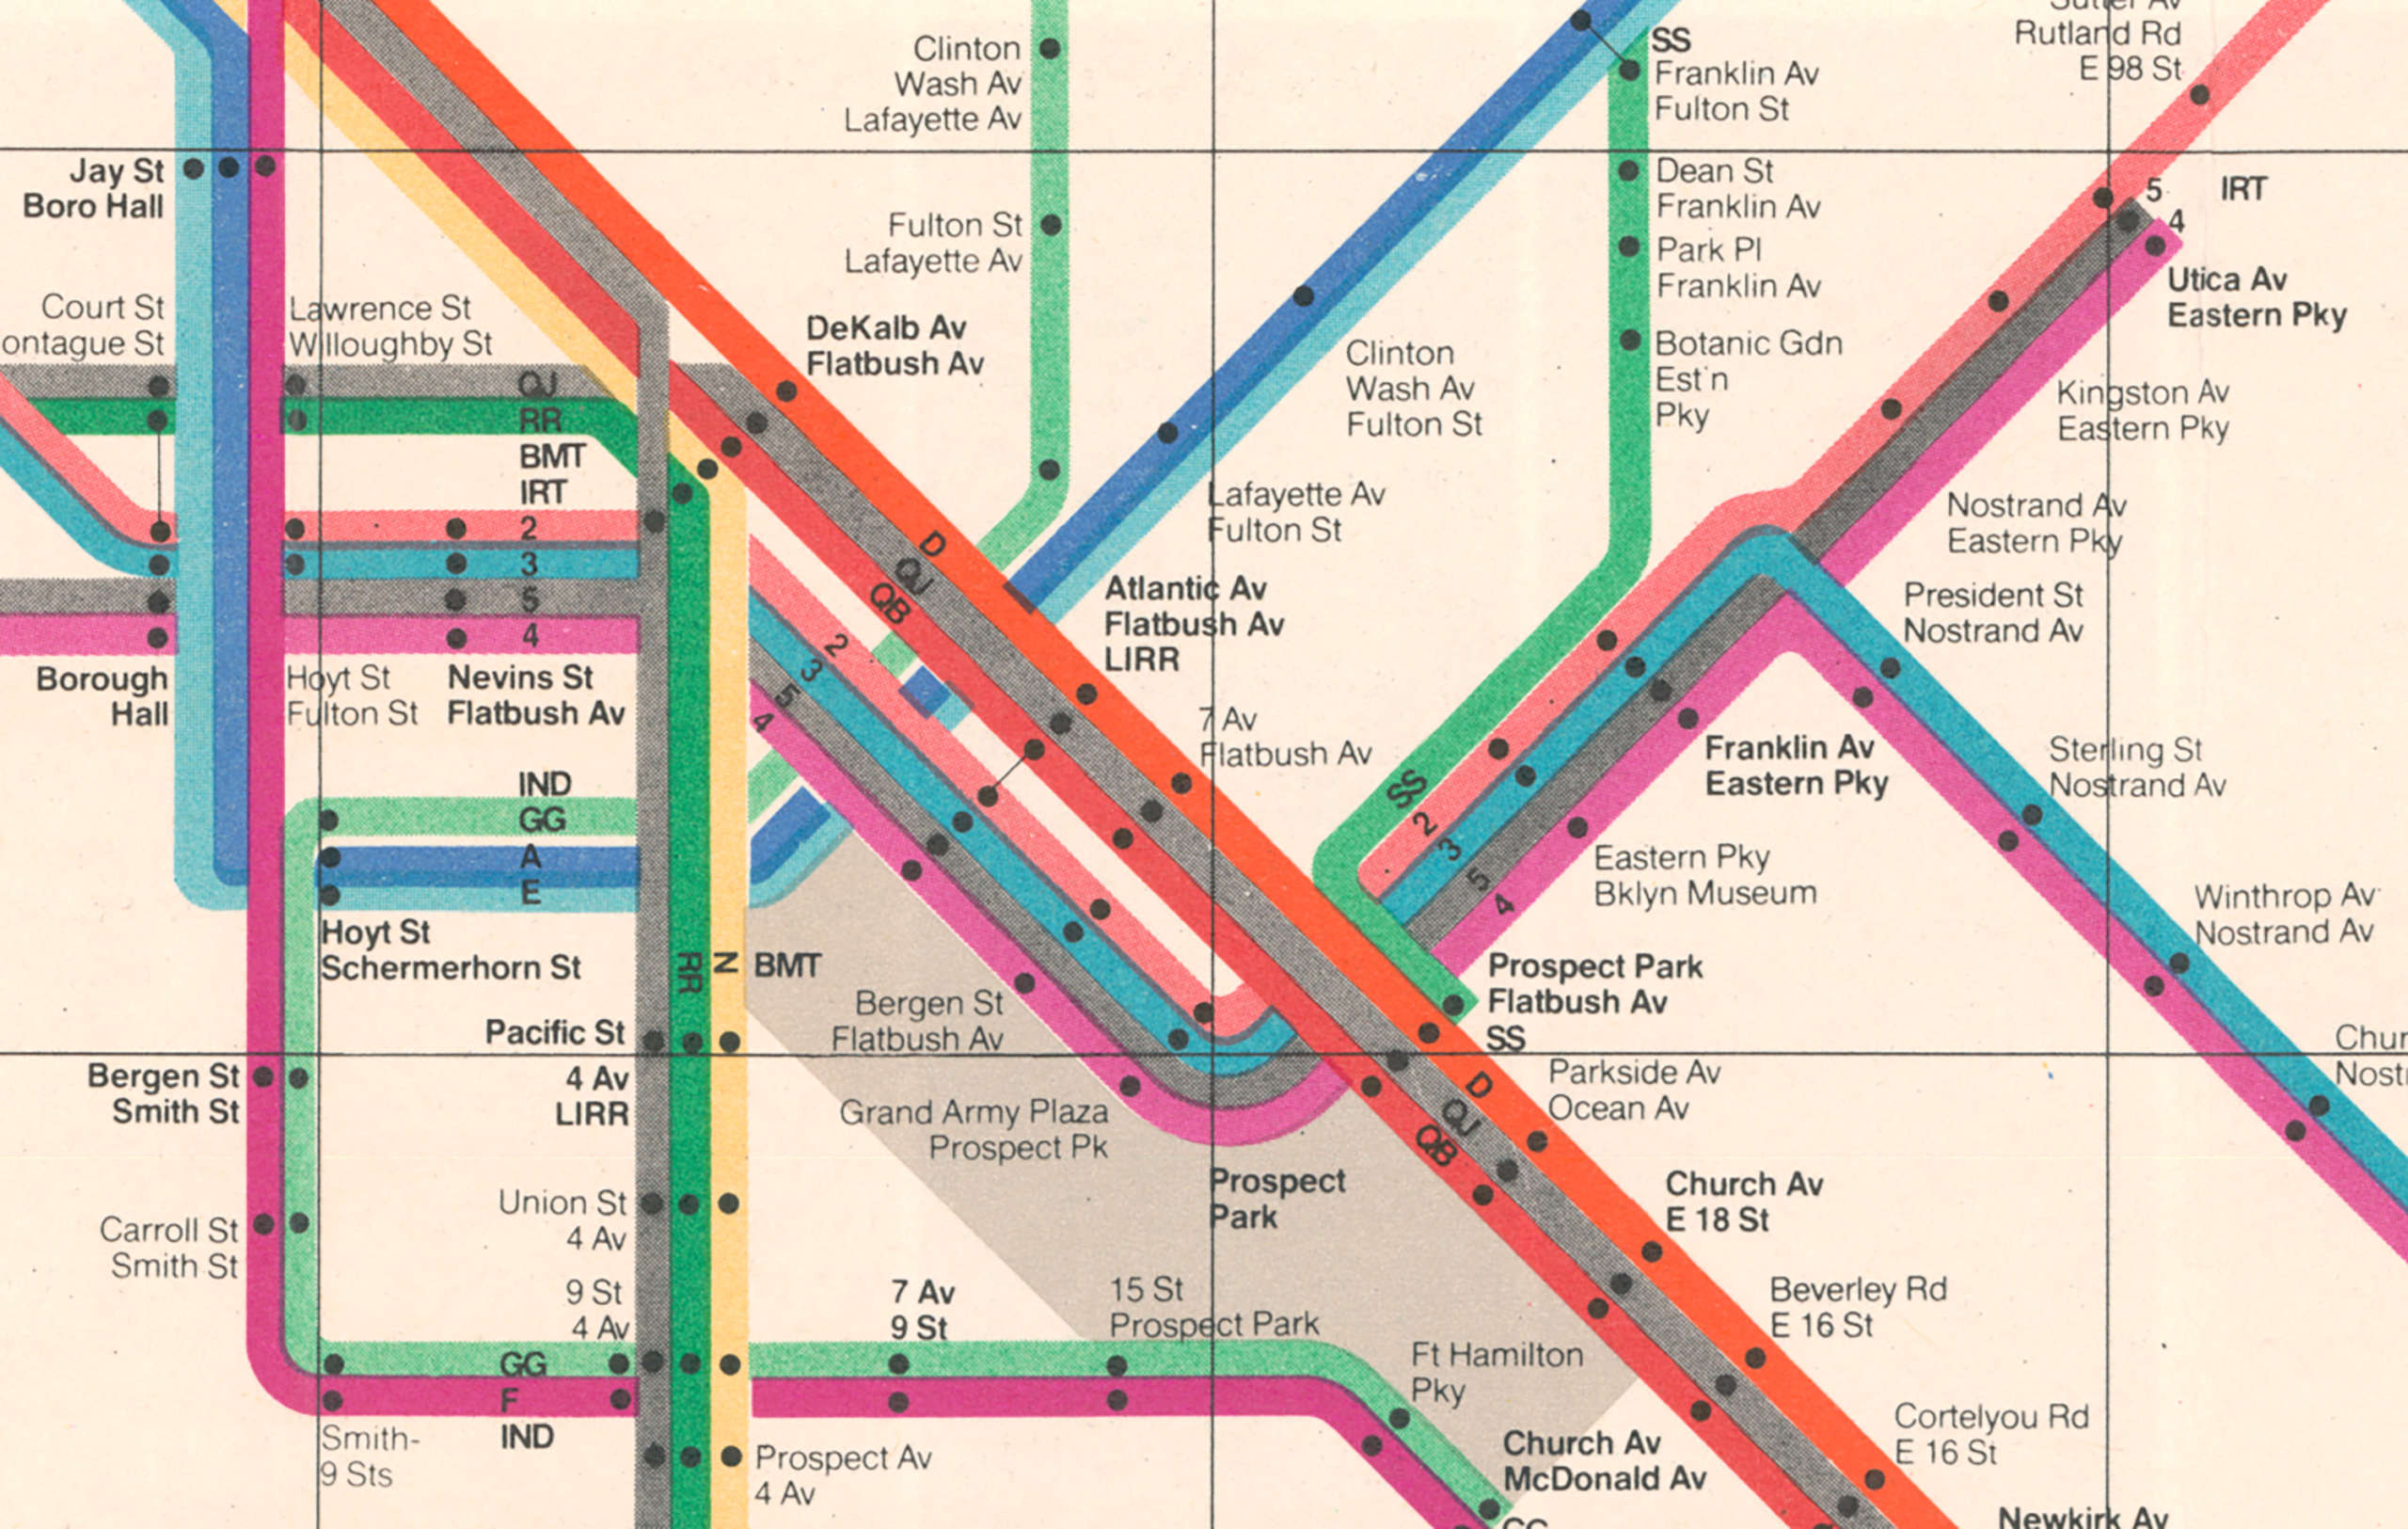 Details of 1972 subway map with bright colors and station name.